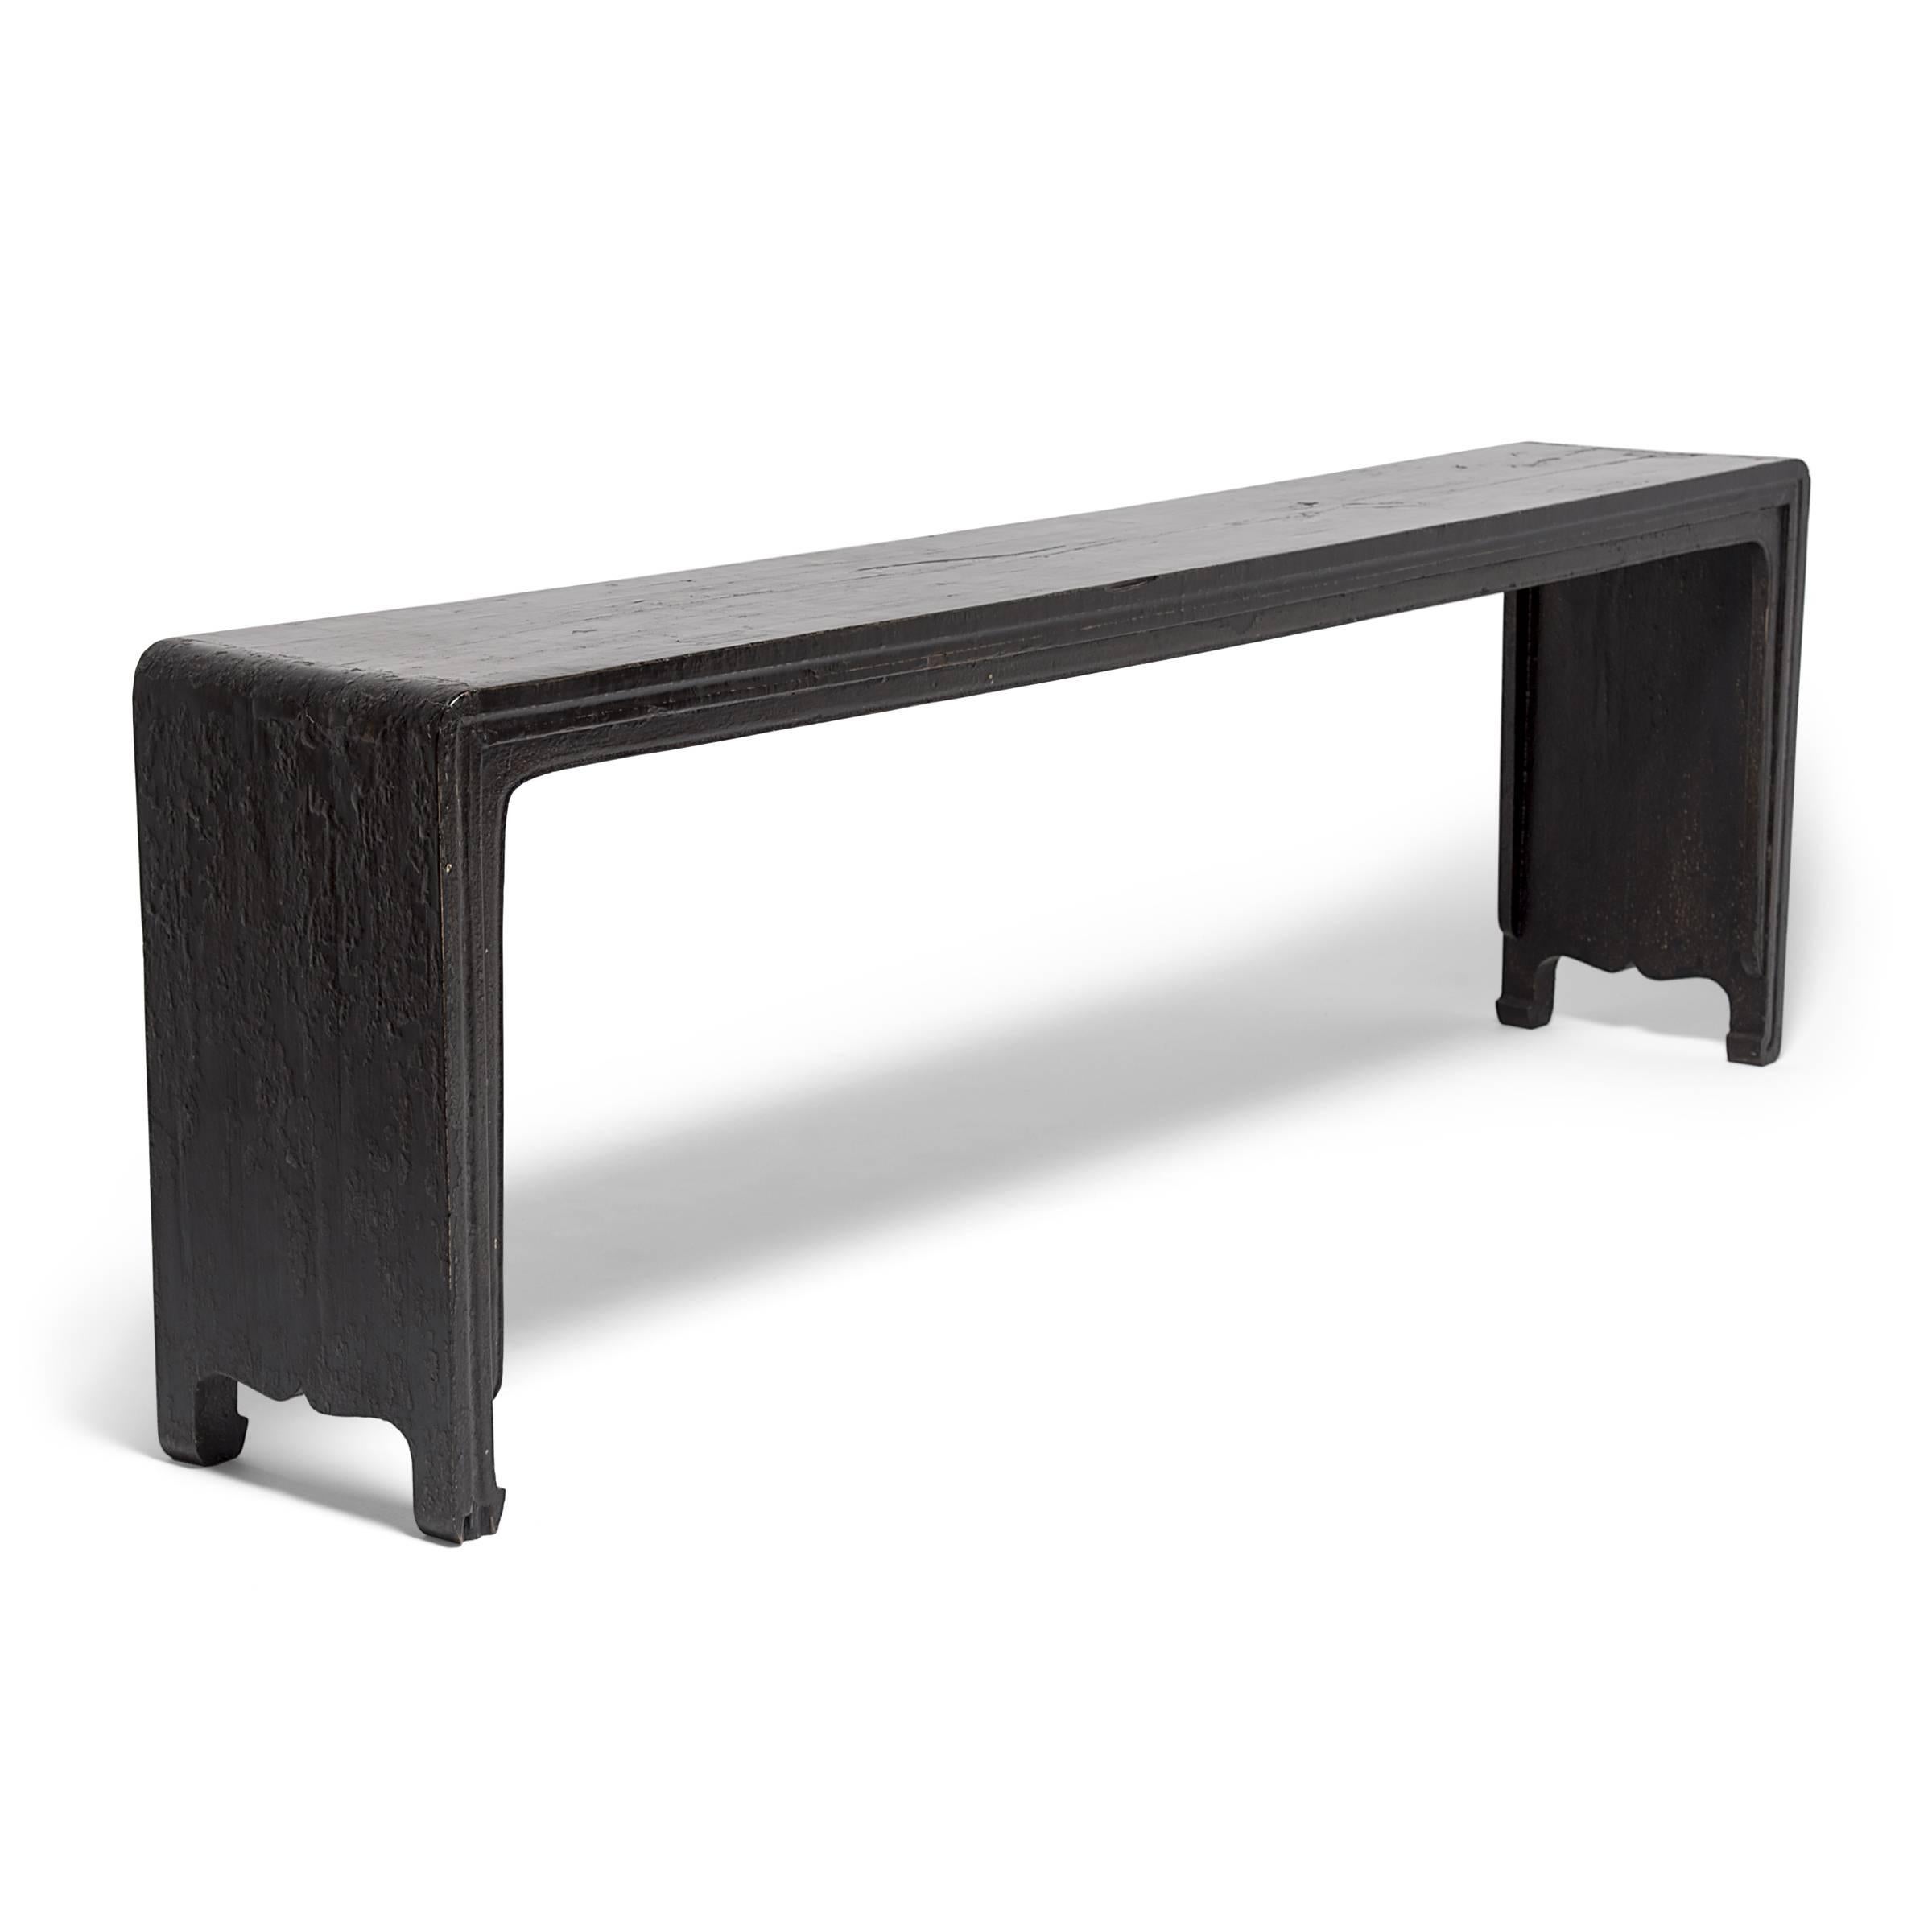 Bringing this altar table’s streamlined shape and waterfall flow into sharp silhouette, the fantastic black lacquer, once glossy and seamless, has aged beautifully with depth and texture that imbue great character. Worn sections now give us a peek